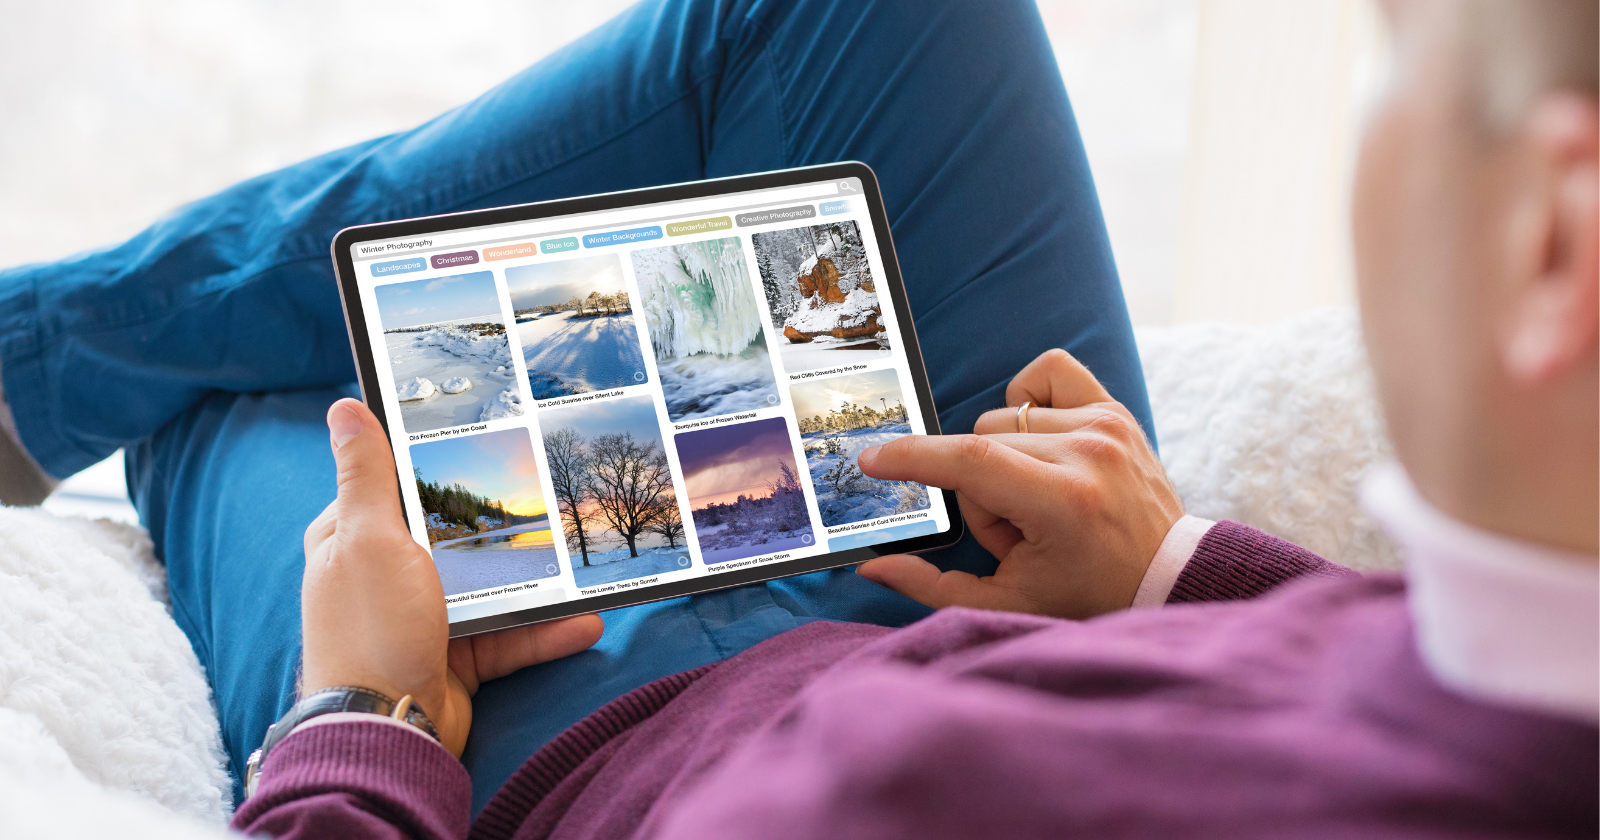 11 Best Image Search Engines For Visual Content via @sejournal, @JuliaEMcCoy